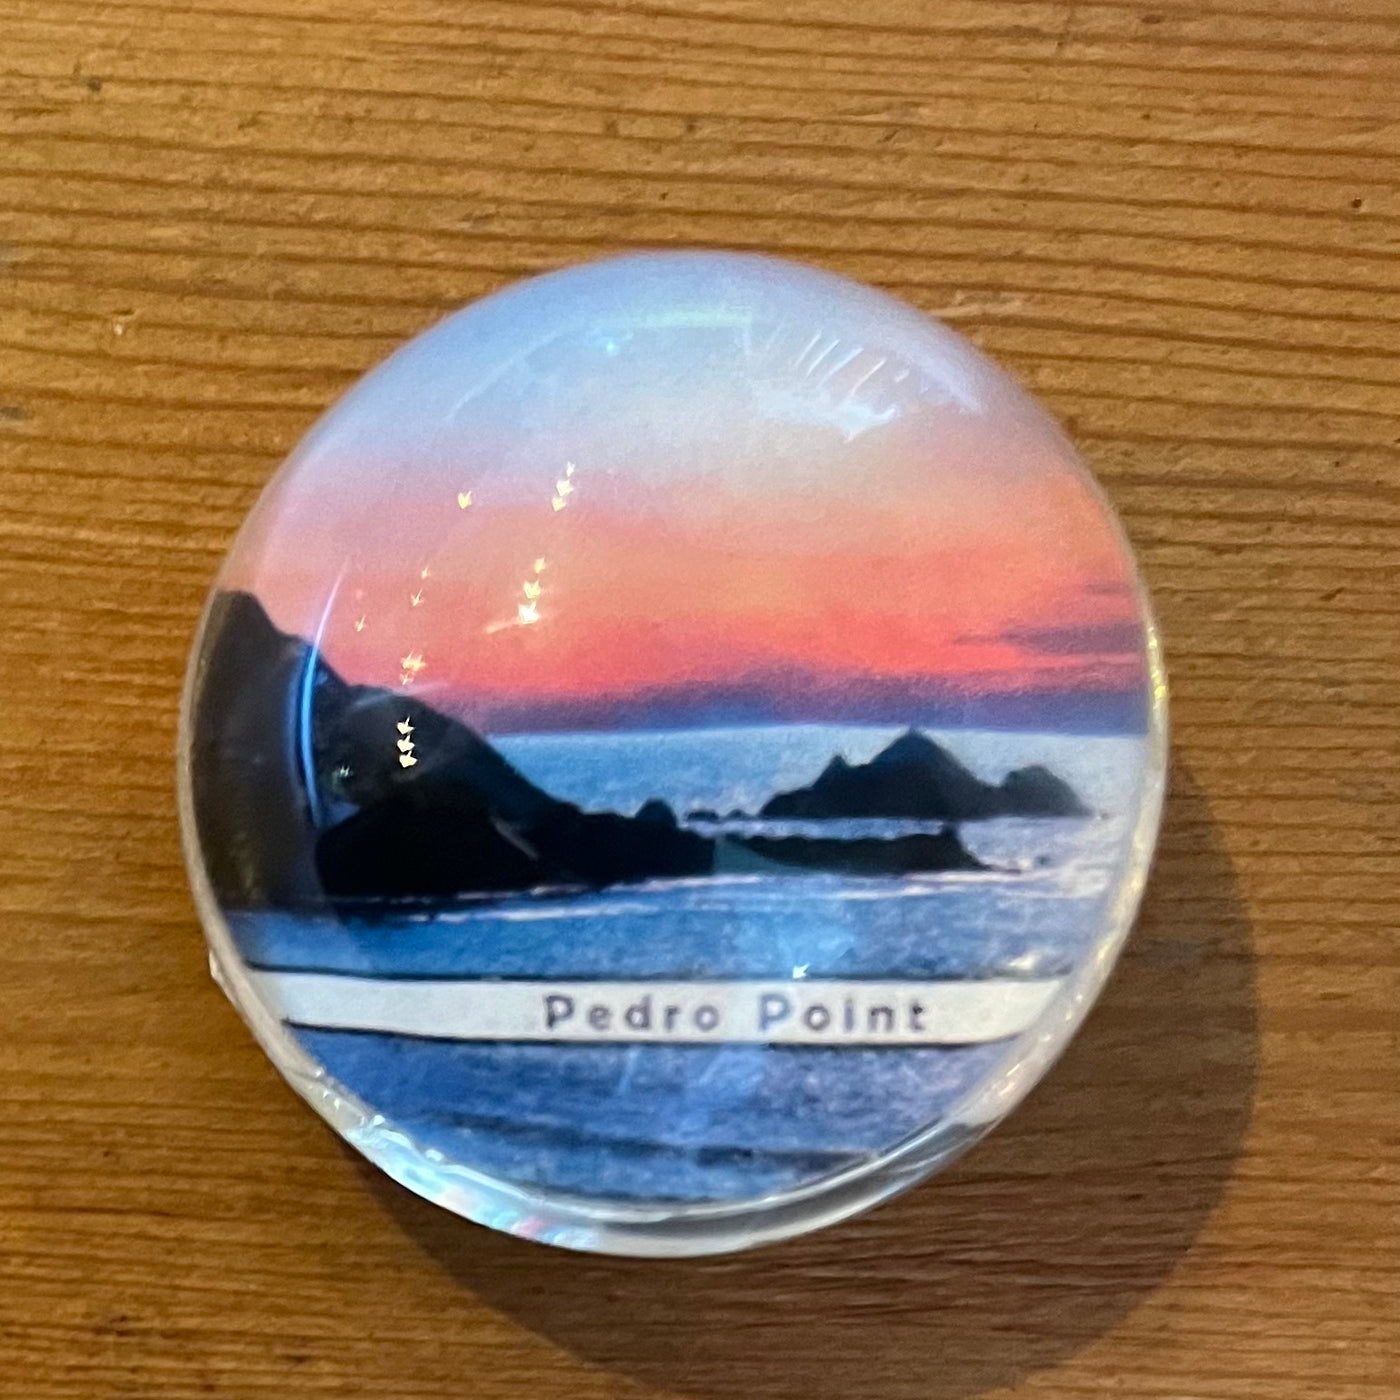 Pacifica Magnets